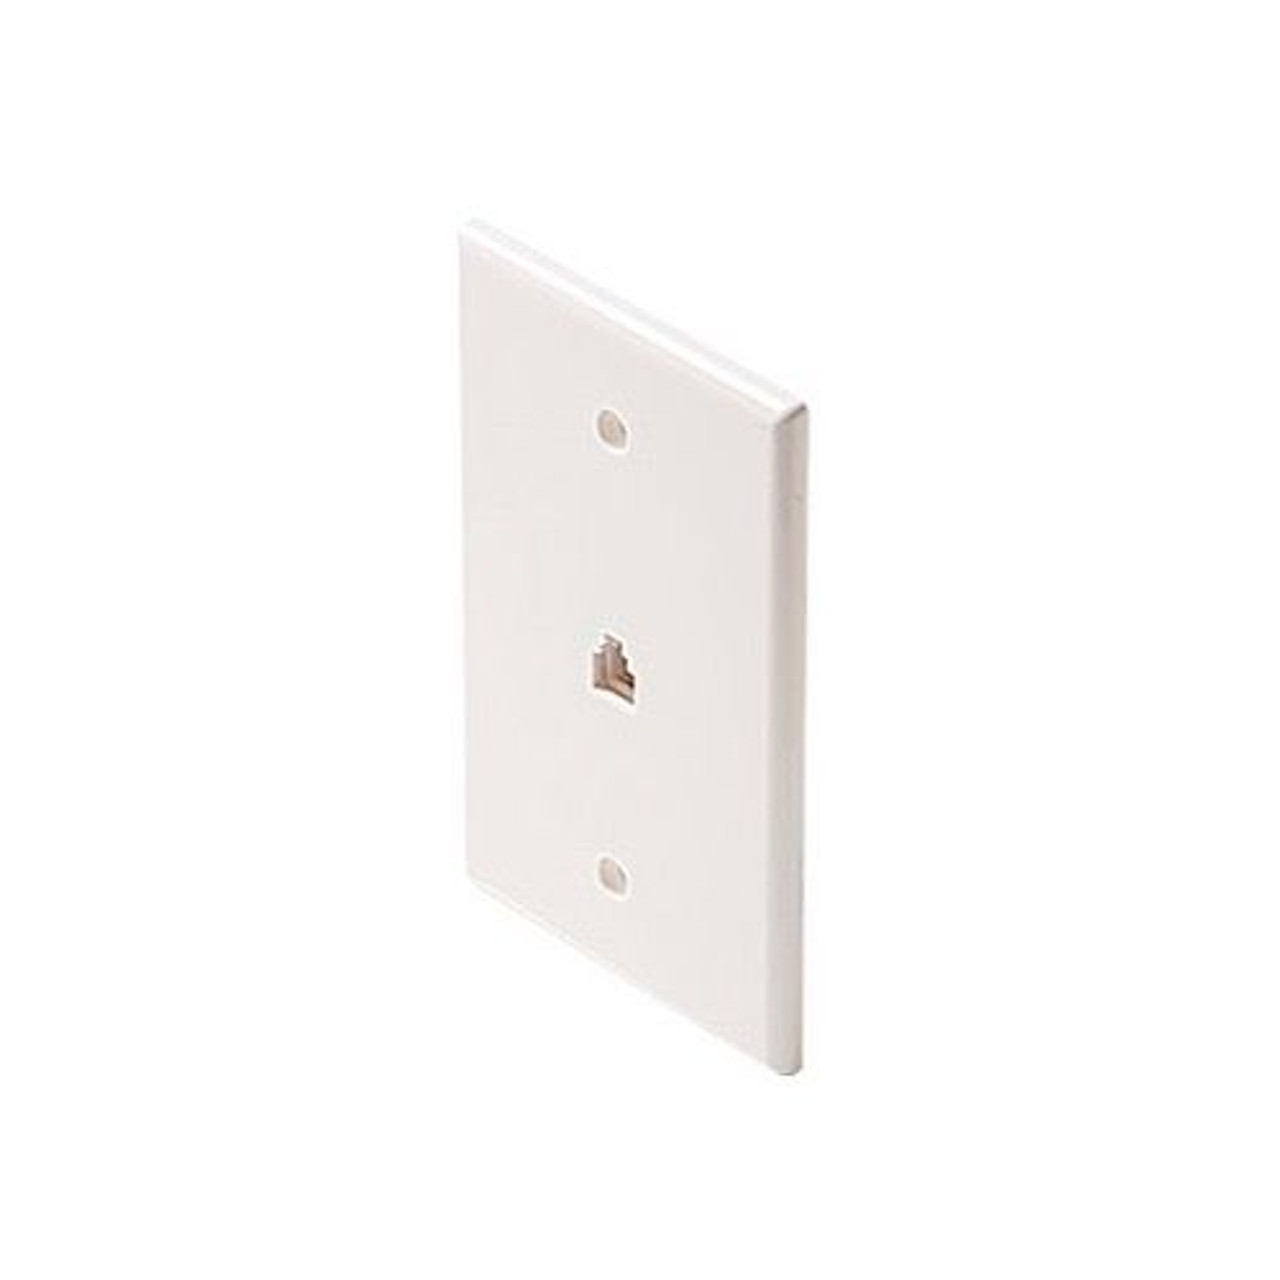 Steren 300-203WH Wall Plate Mid Size Phone White RJ11 Jack Oversize 3 1/8" x 4 7/8" Face Plate 4-Conductor RJ-11 Modular Telephone Gold Contacts 6P4C Jack Face Plate Audio Signal Data Plug, Part # 300203-WH